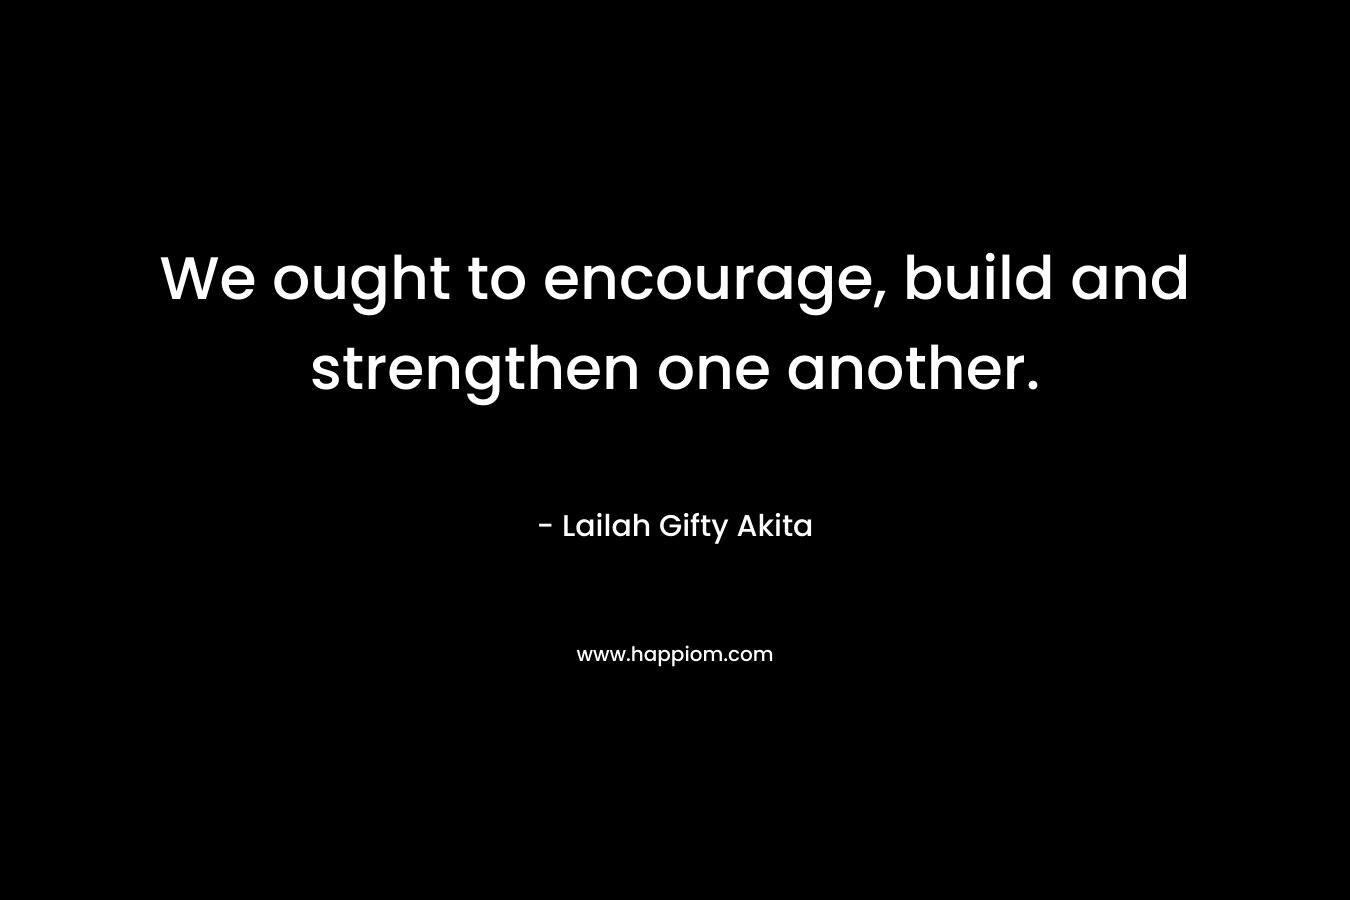 We ought to encourage, build and strengthen one another.